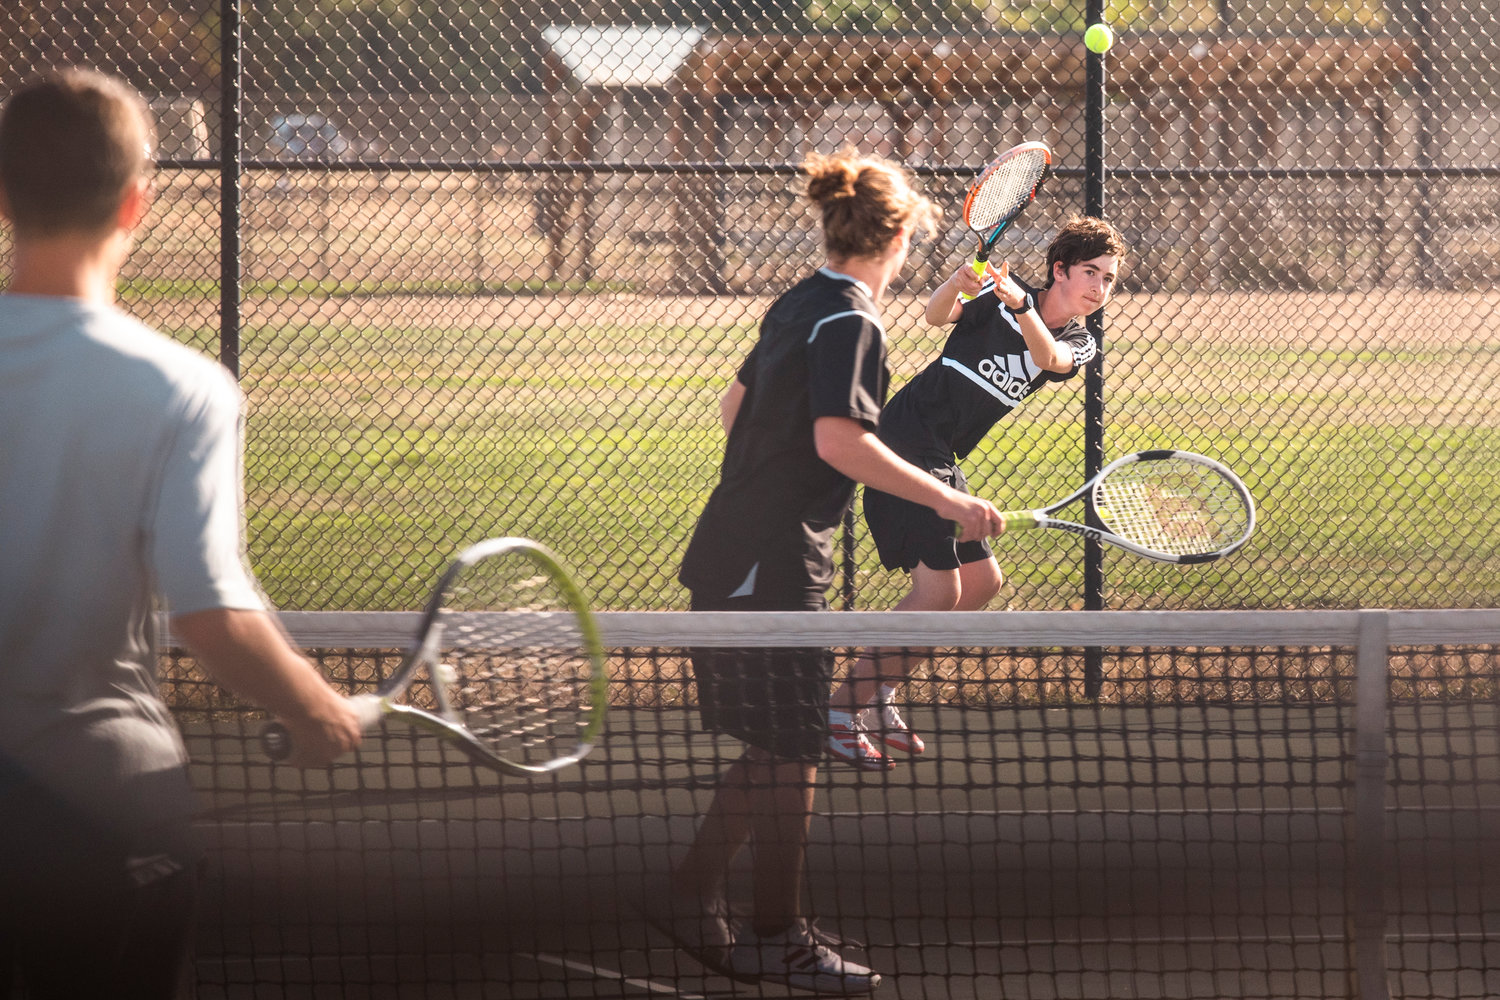 W.F. West competes in a tennis match against Centralia.